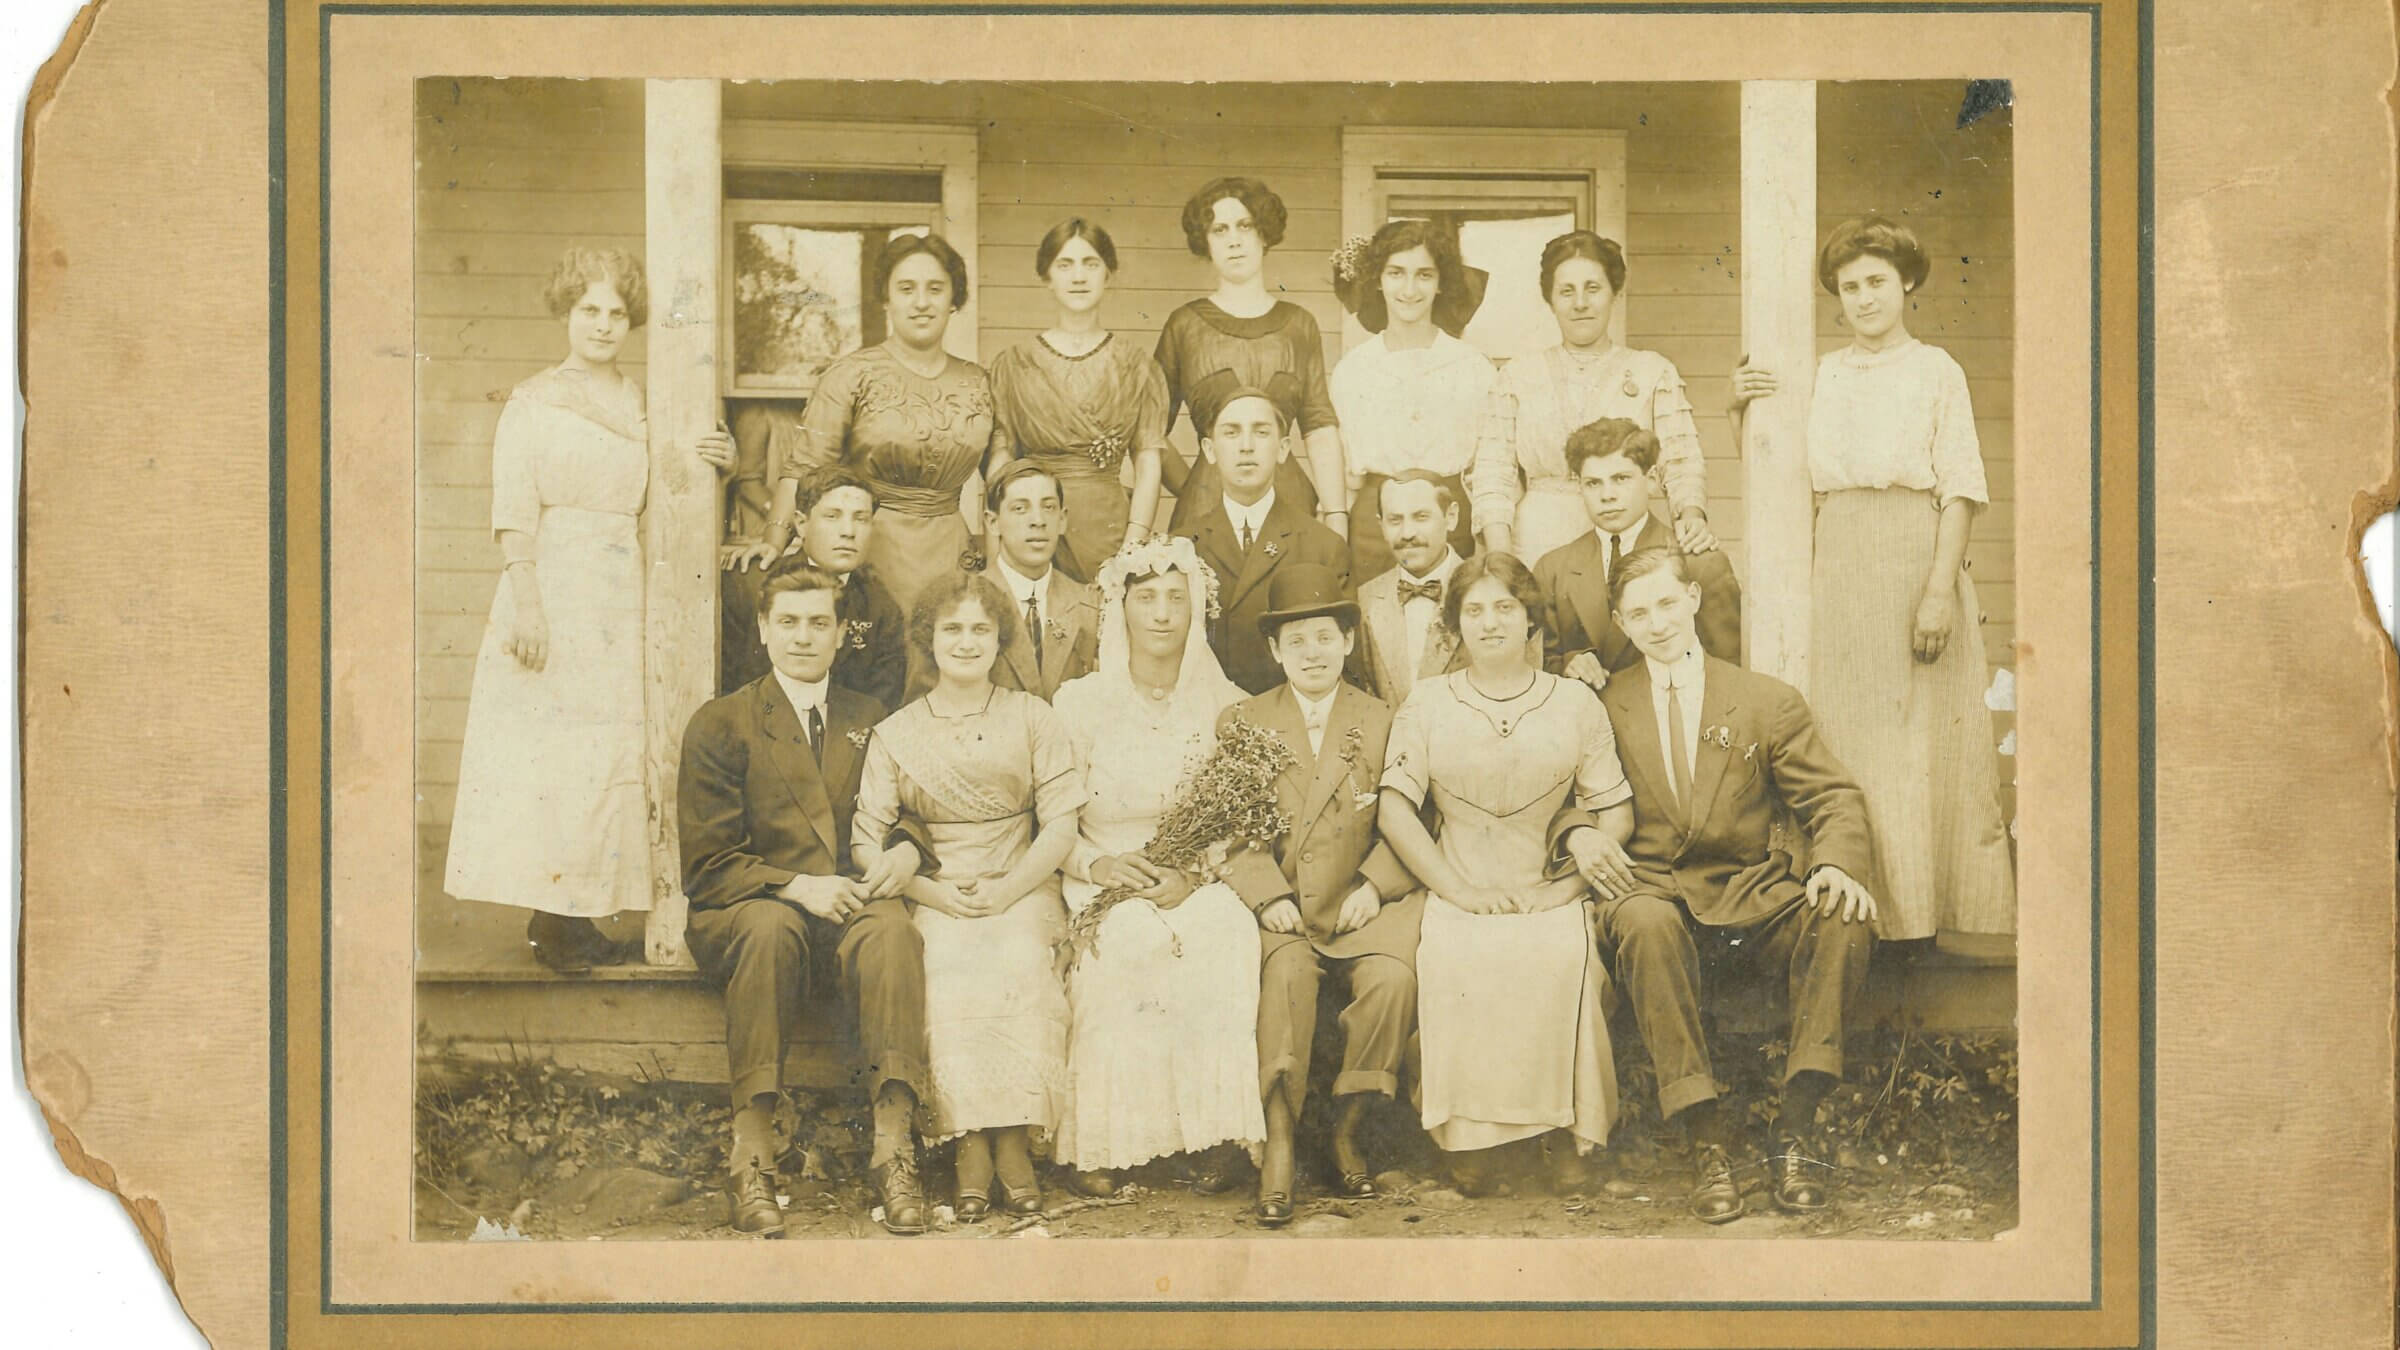 A drag wedding in the Catskills circa 1910, when Jews would board with farmers for vacation.